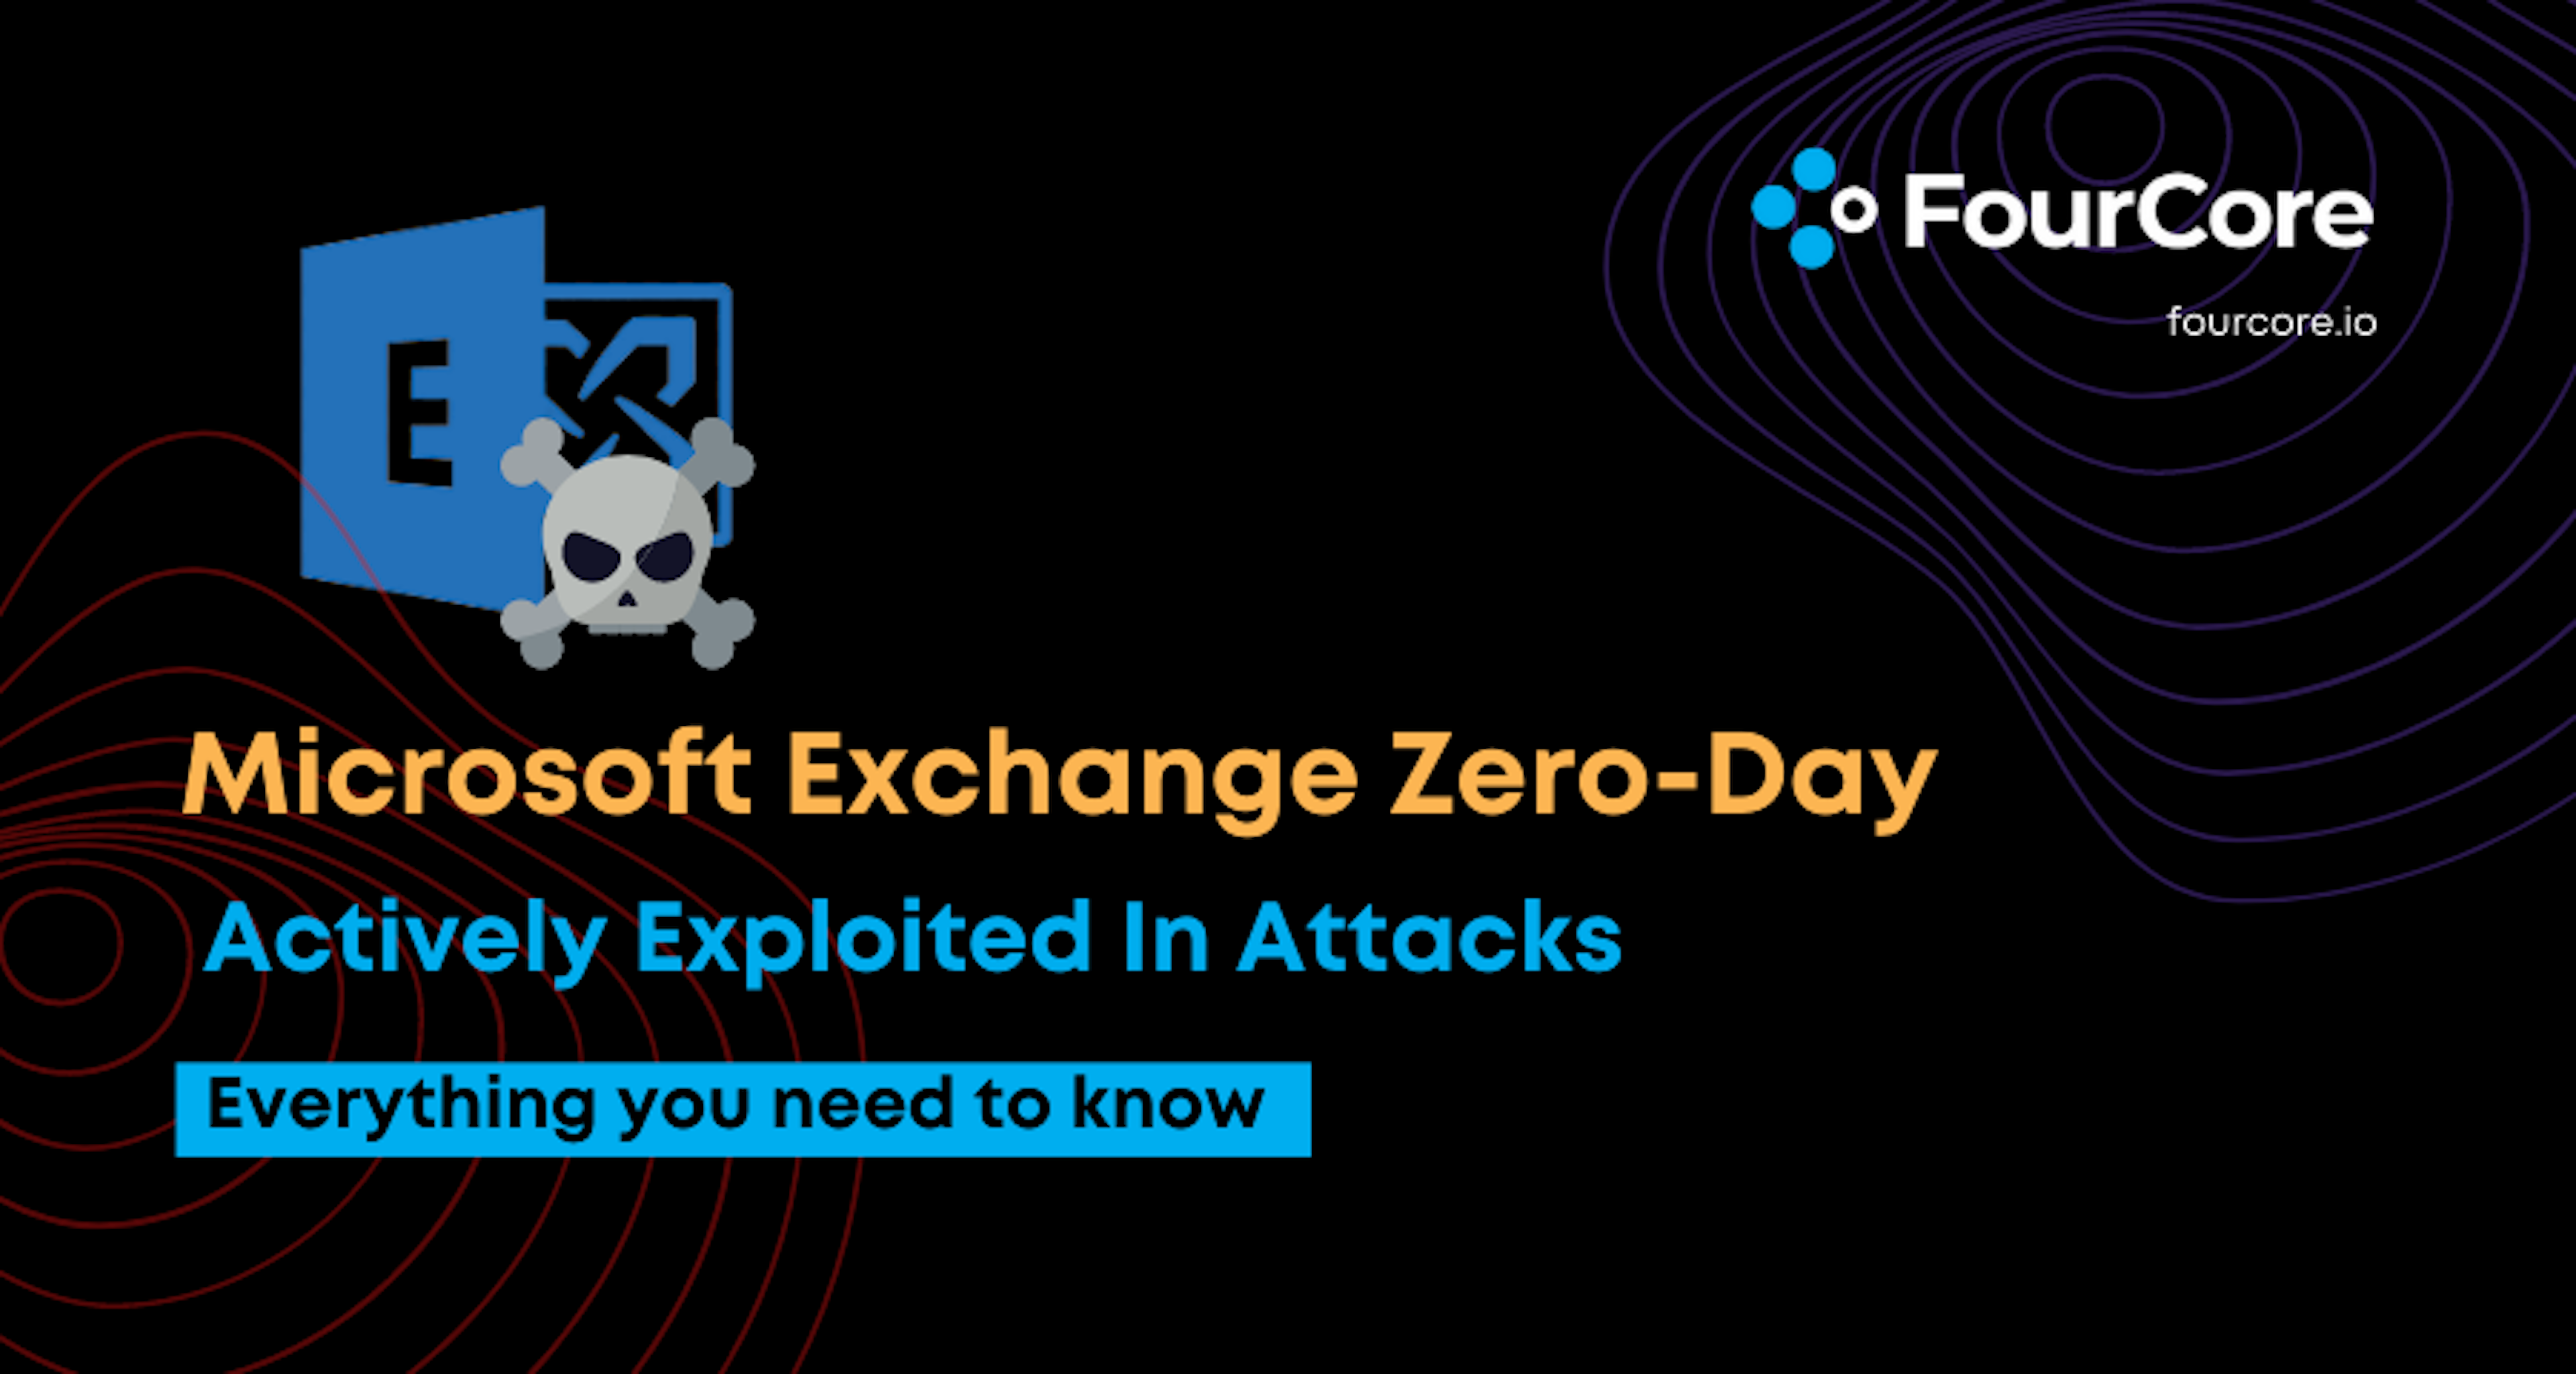 Microsoft Exchange Zero-Day Actively Exploited In Attacks: How to Mitigate Blog Post Image